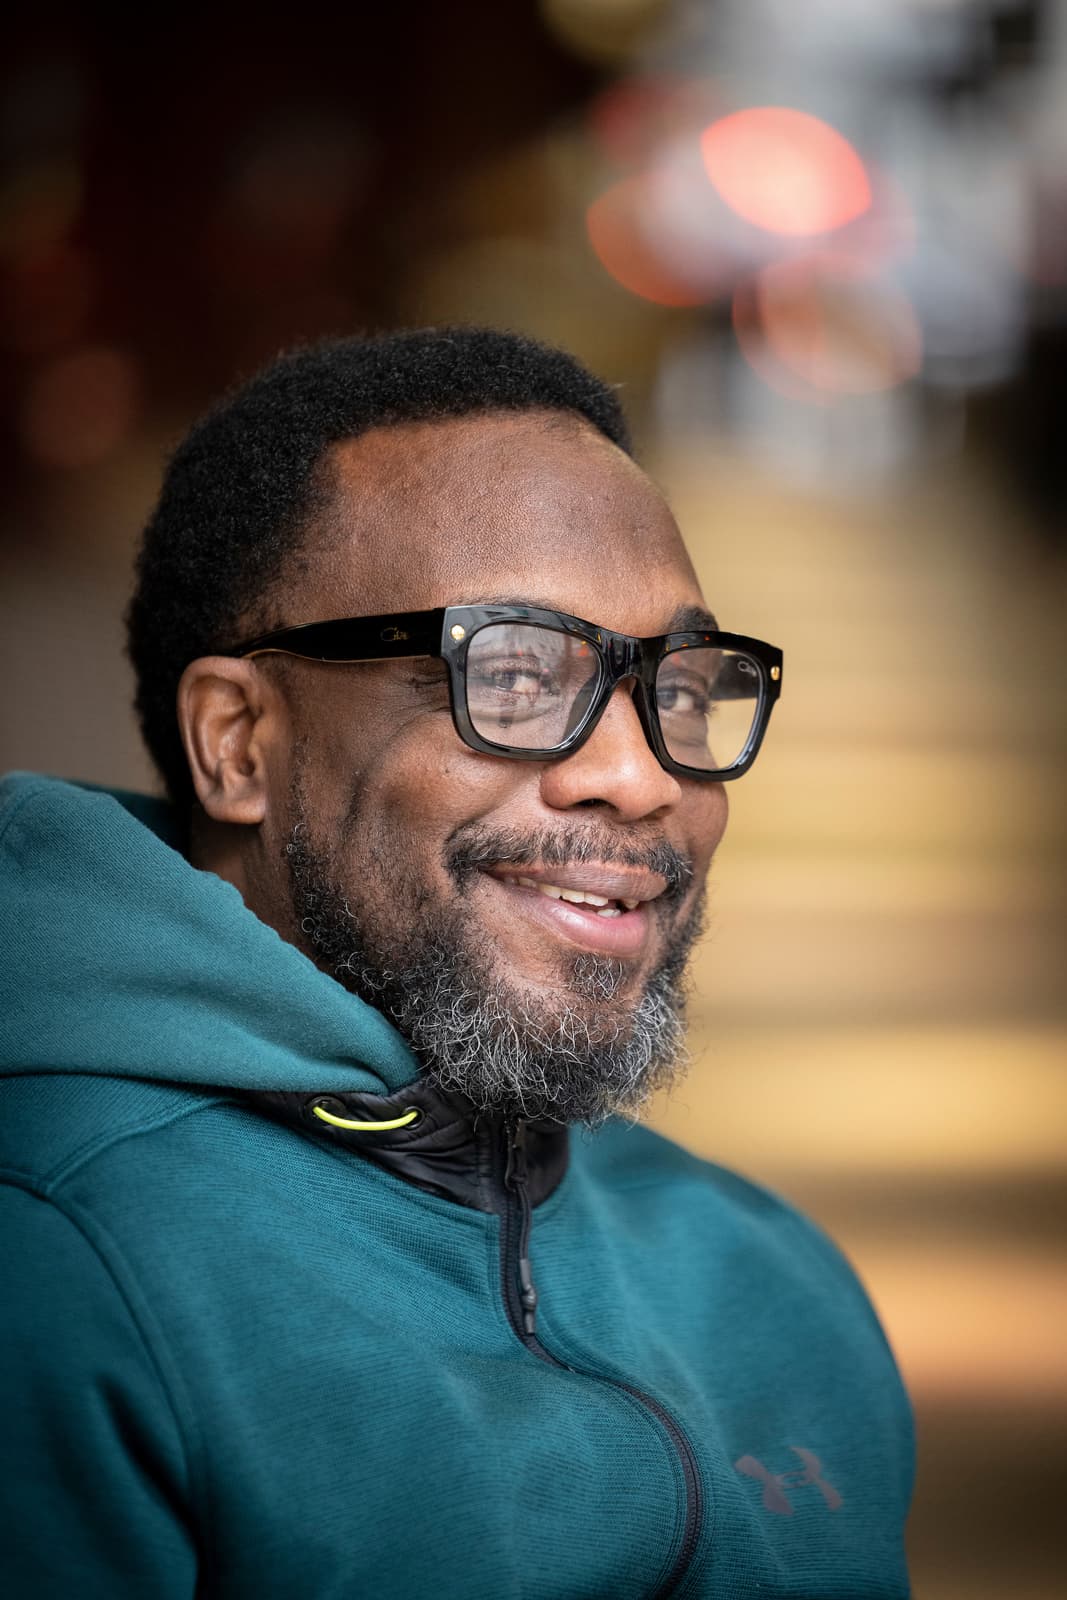 Rodney, with his black Ray-Ban style eyeglasses and salt and pepper beard and mustache, smiles for a close-up portrait